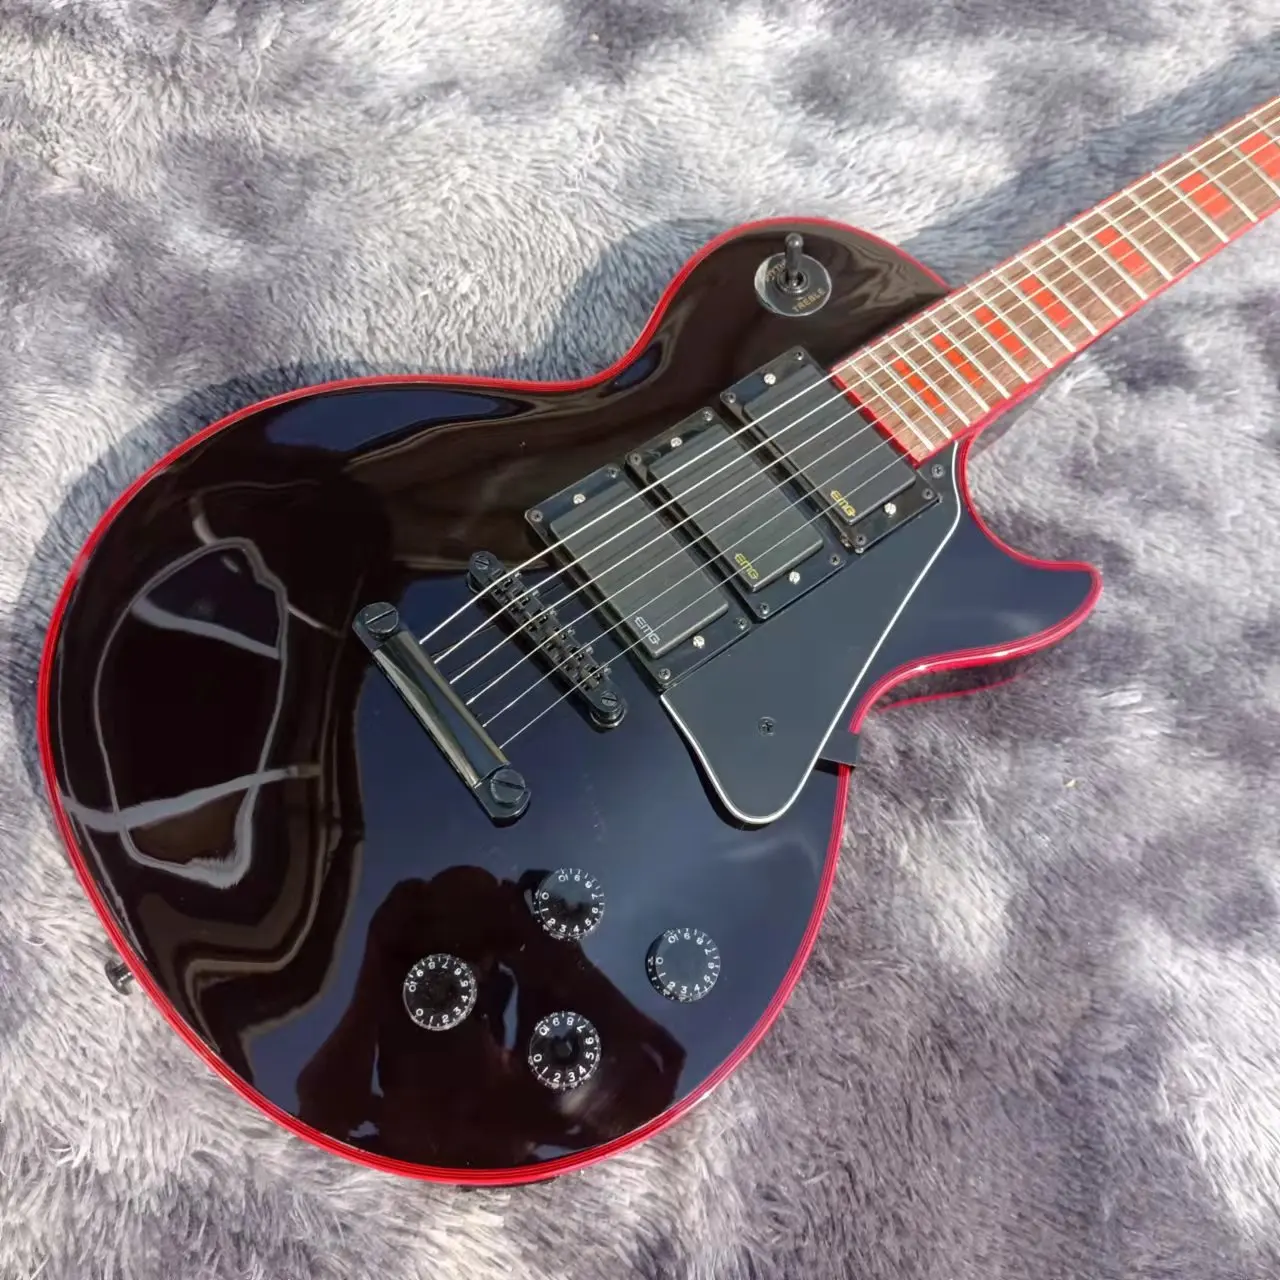 

2022!NEW!OEM 6 string electric guitar, 3 pickup guitars, black electric guitar, red edge binding, free delivery